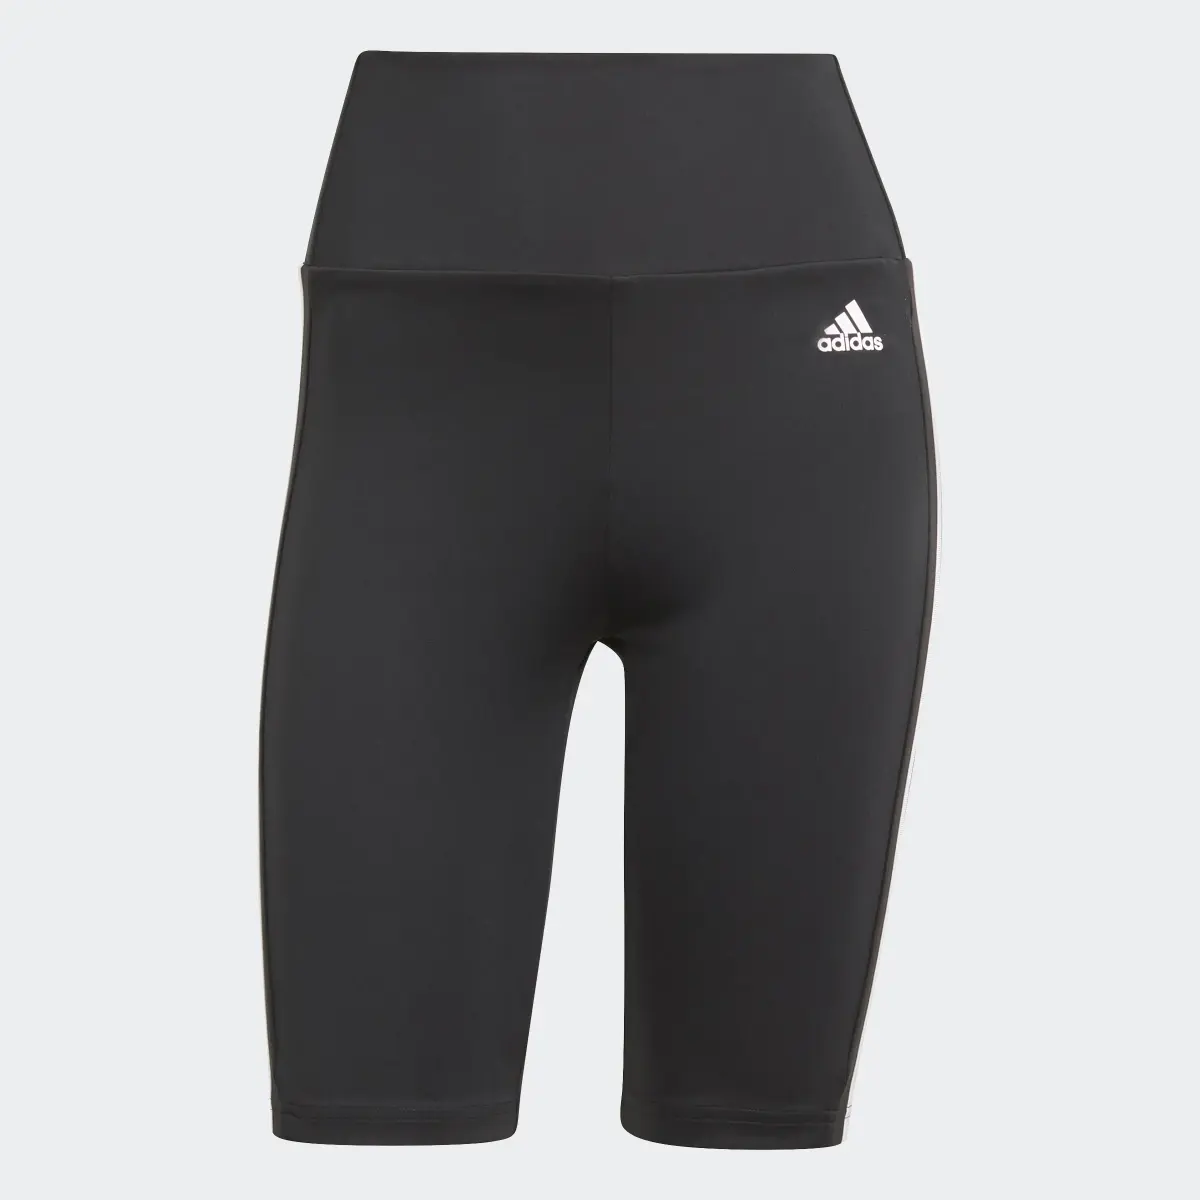 Adidas Designed To Move High-Rise Short Sport Tights. 1